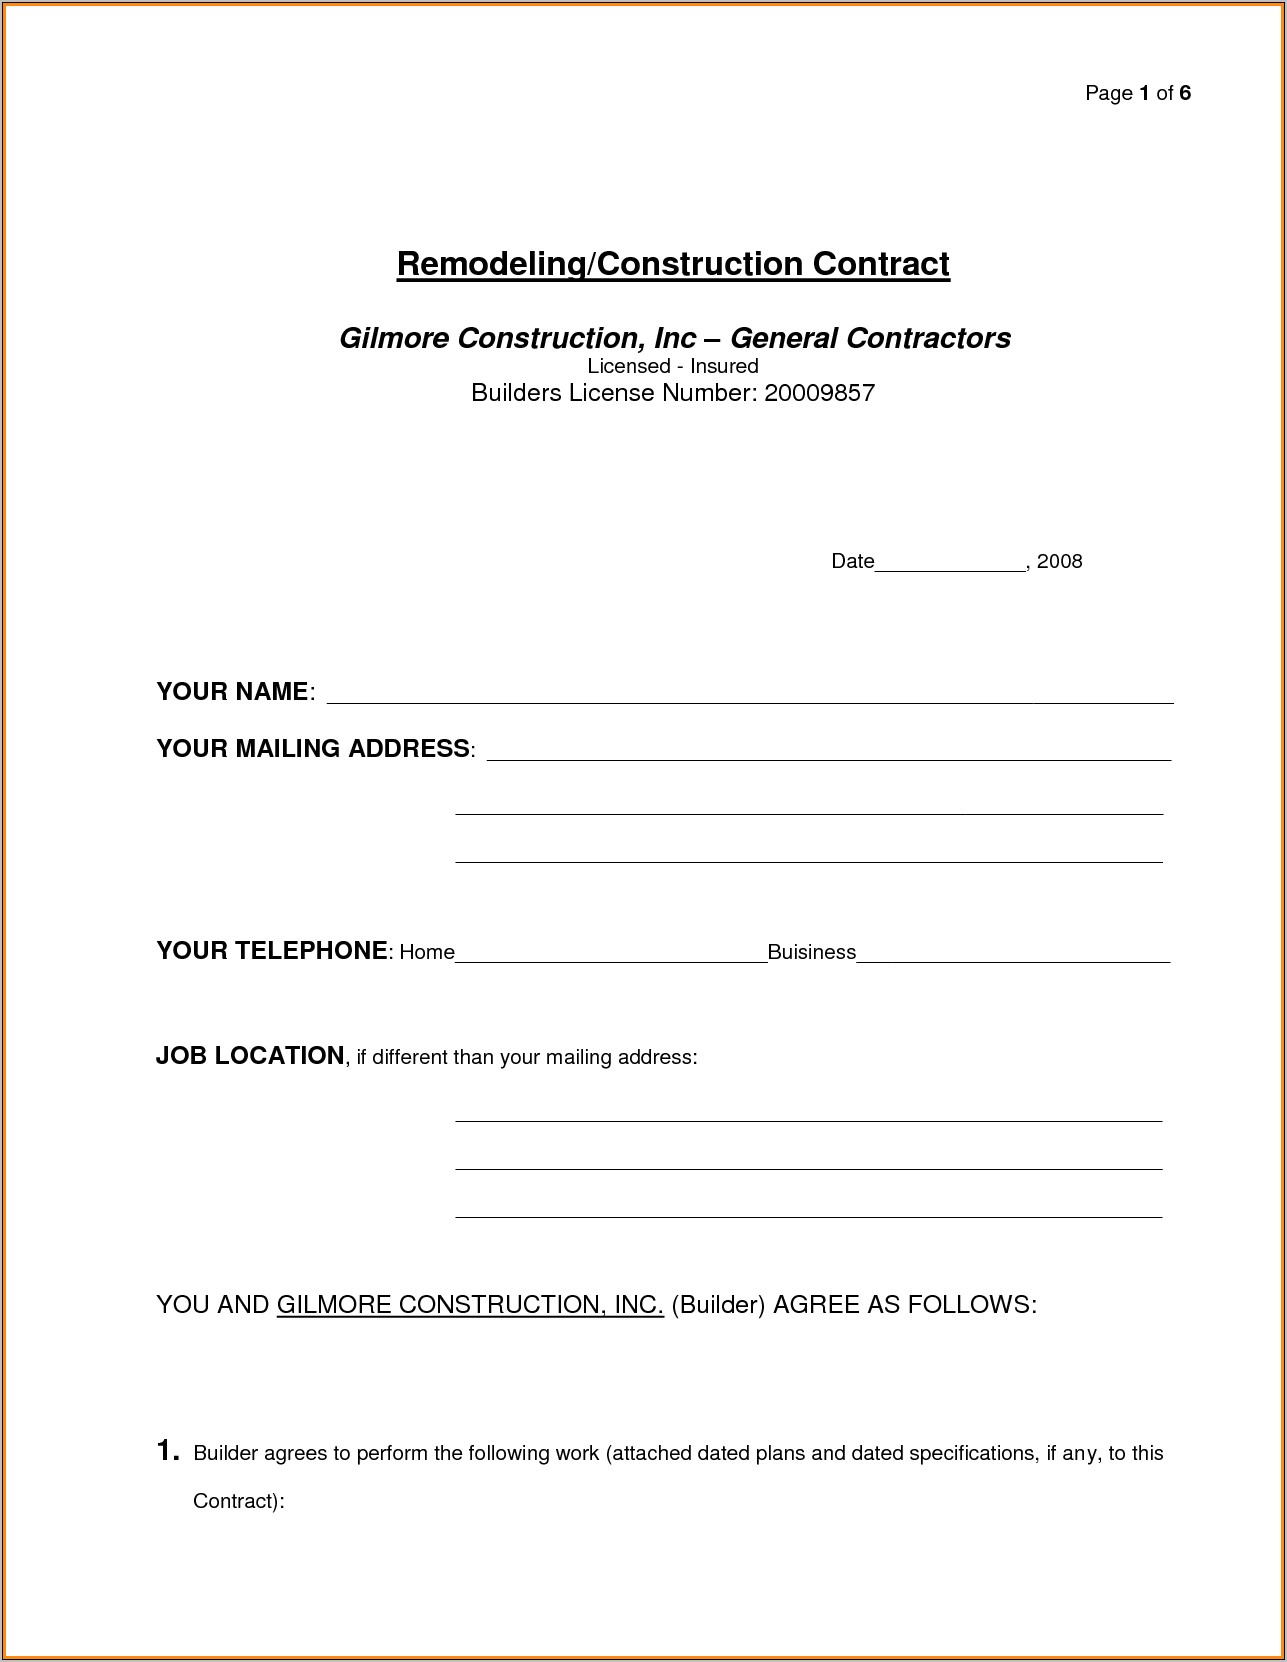 Remodeling Construction Contract Template